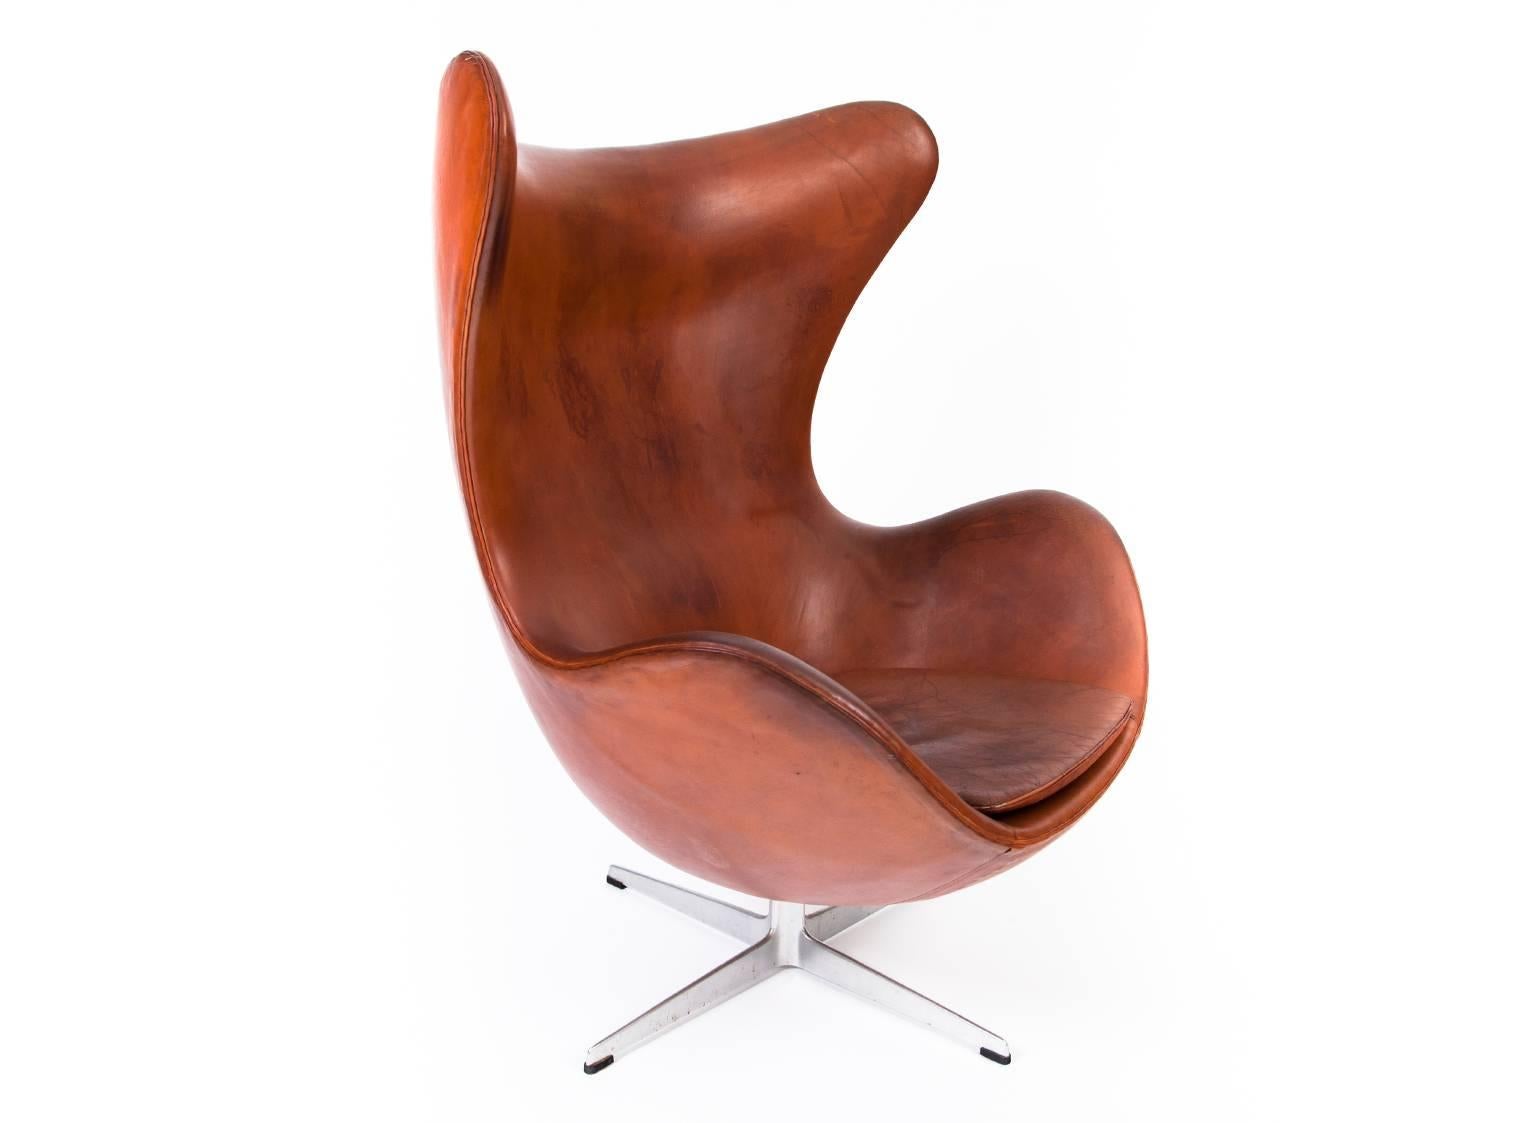 Arne Jacobsen Egg Chair with Ottoman in Patinated Leather In Excellent Condition For Sale In Copenhagen, DK